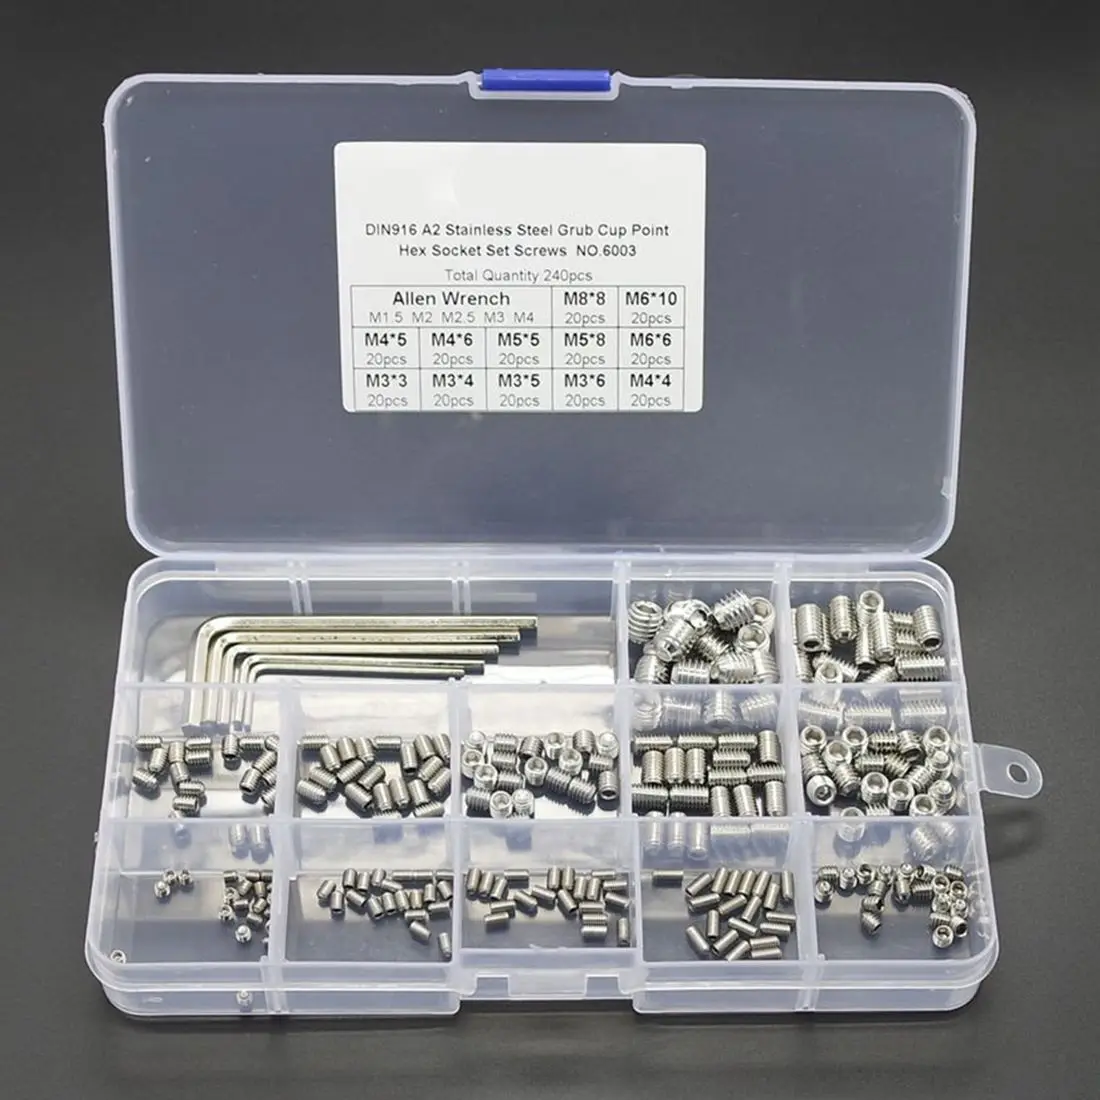 

240Pcs Grub Screw Cup Point Hex Head Socket Set M3x3 M3x4 M3x5 M4x4 M4x5 M4x6 M5x5 M5x8 M6x6 M6x10 M8x8 Hex Key Wrench Stainle